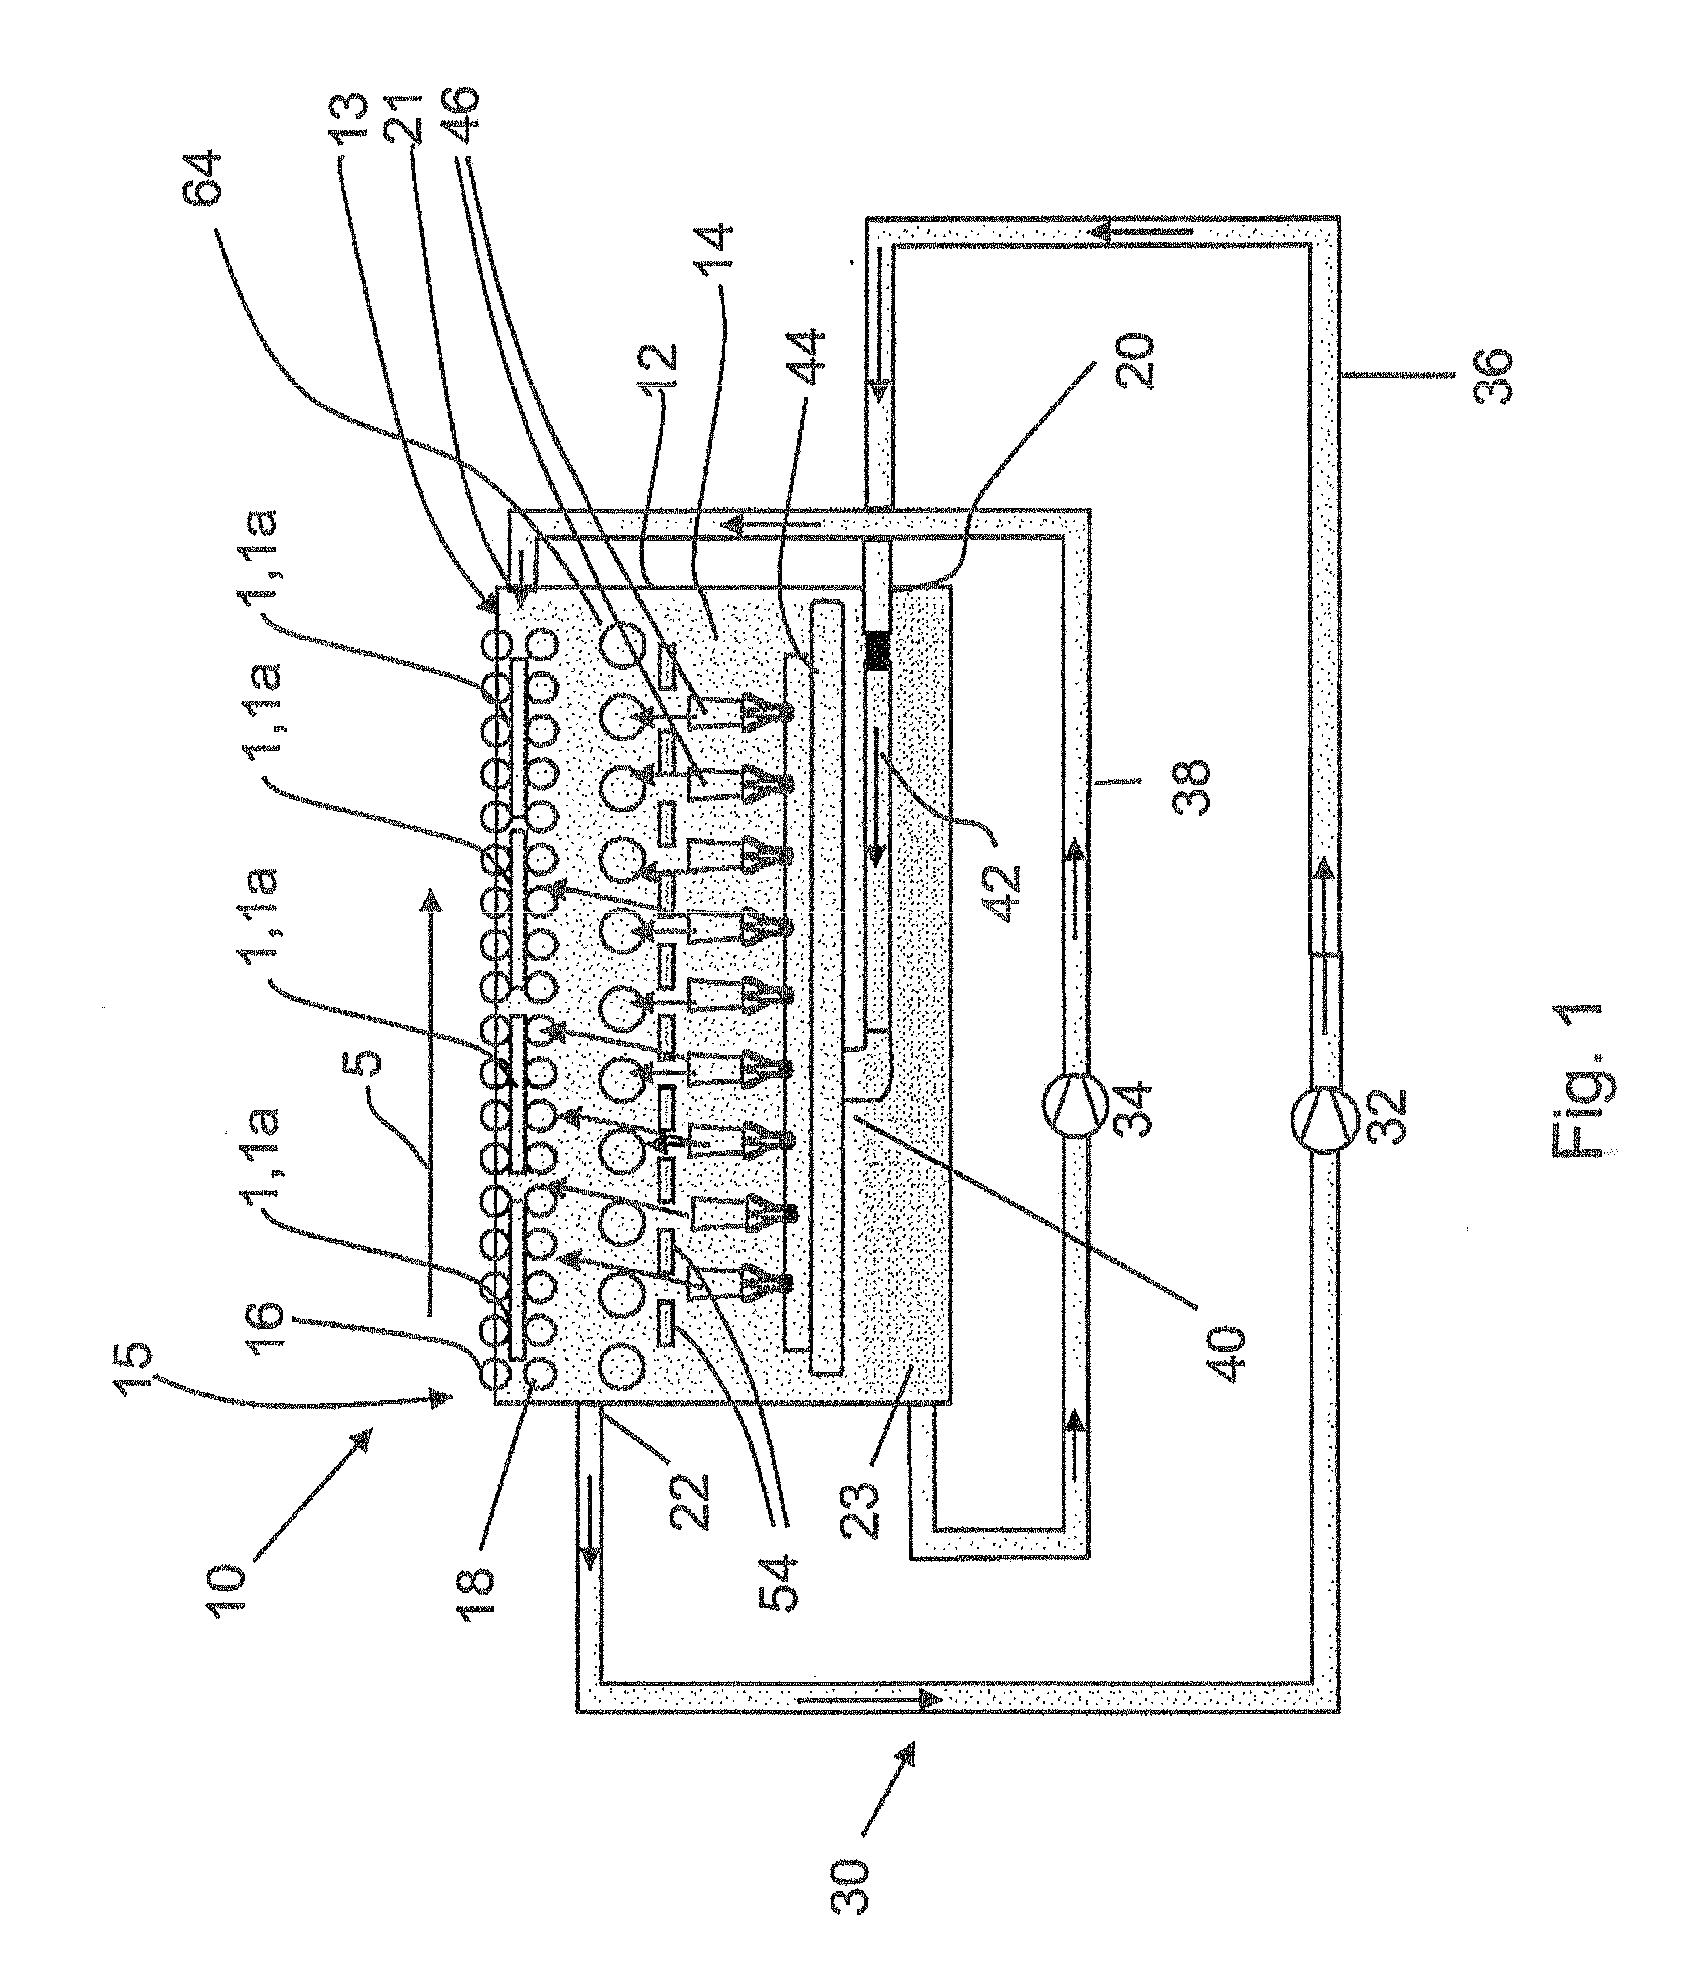 Process and apparatus for electroplating substrates